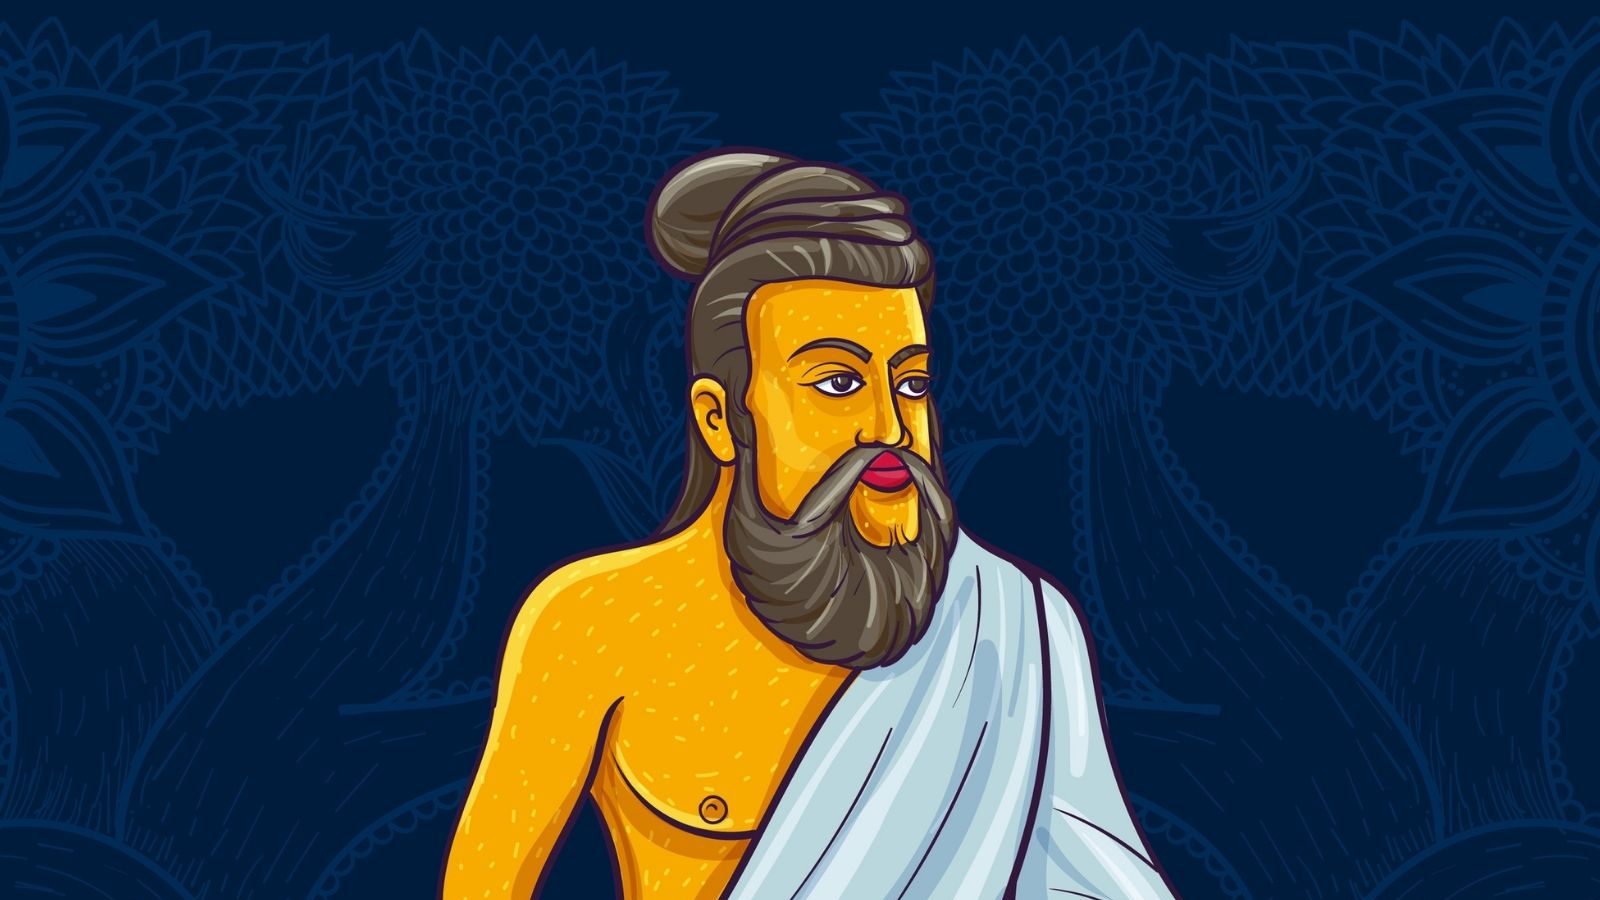 Thiruvalluvar Day 2022: Do you know these lesser known facts about the Tamil poet-philosopher Thiruvalluvar? 